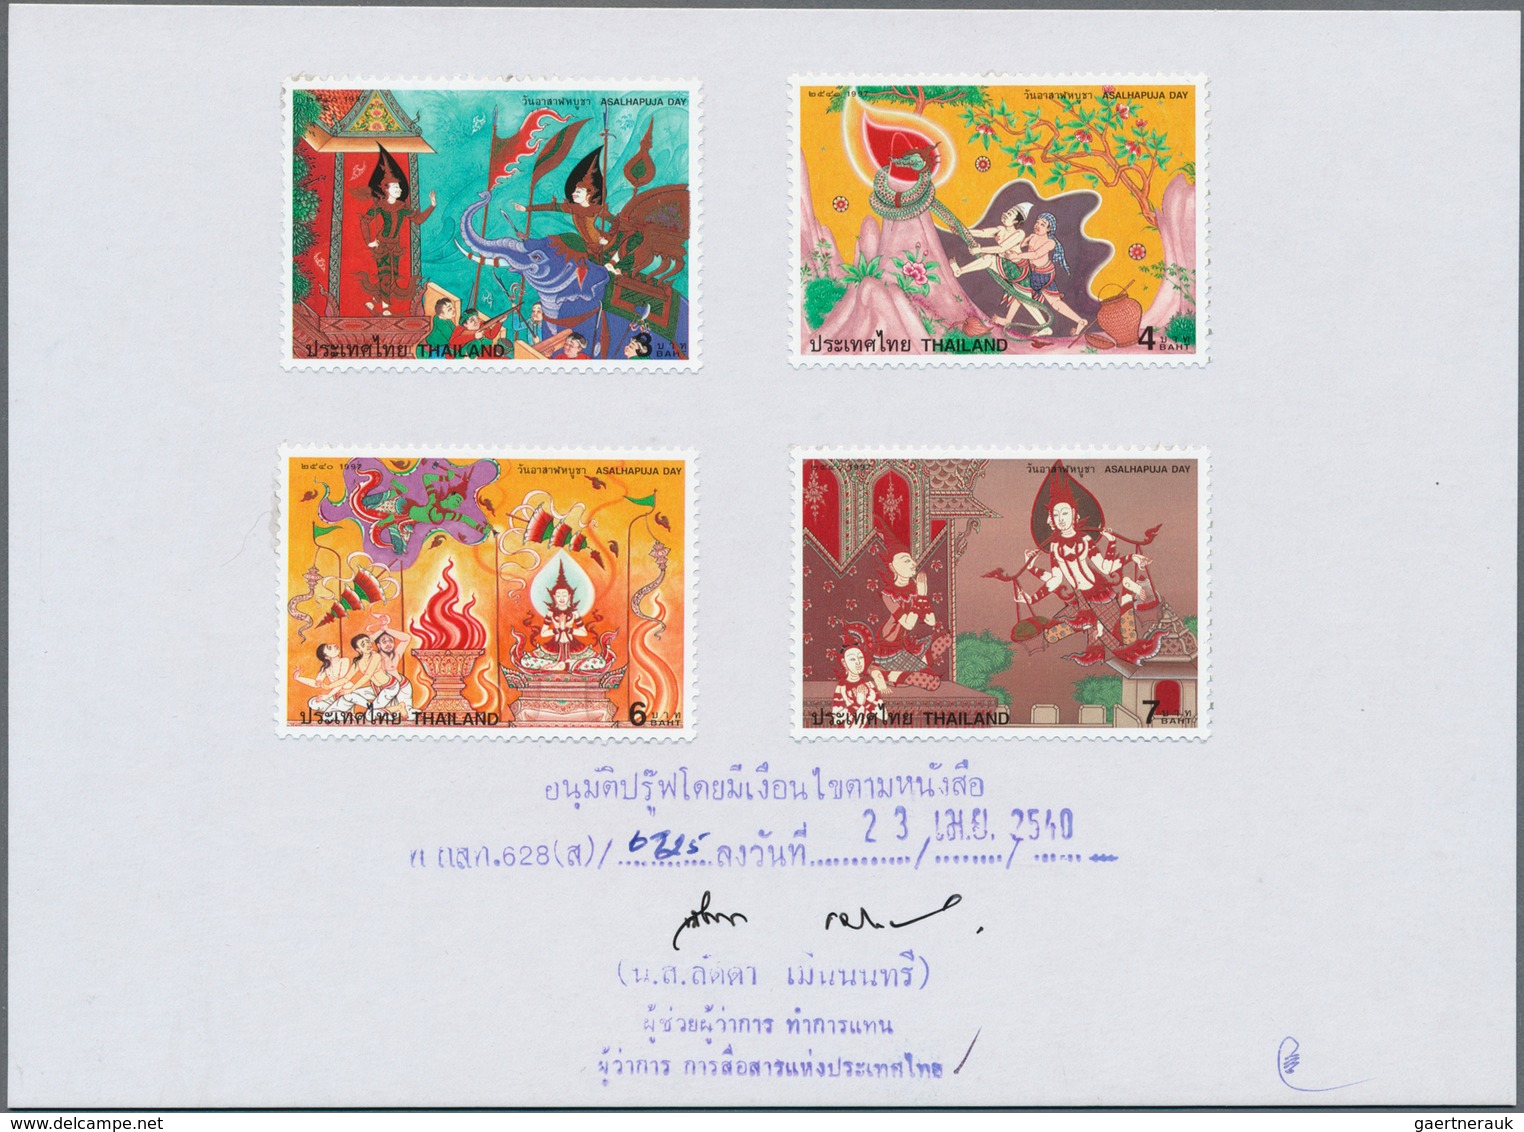 Thailand: 1997. Asalhapuja Day. Complete Set (4 Values) On Signed Printing Card. - Thailand